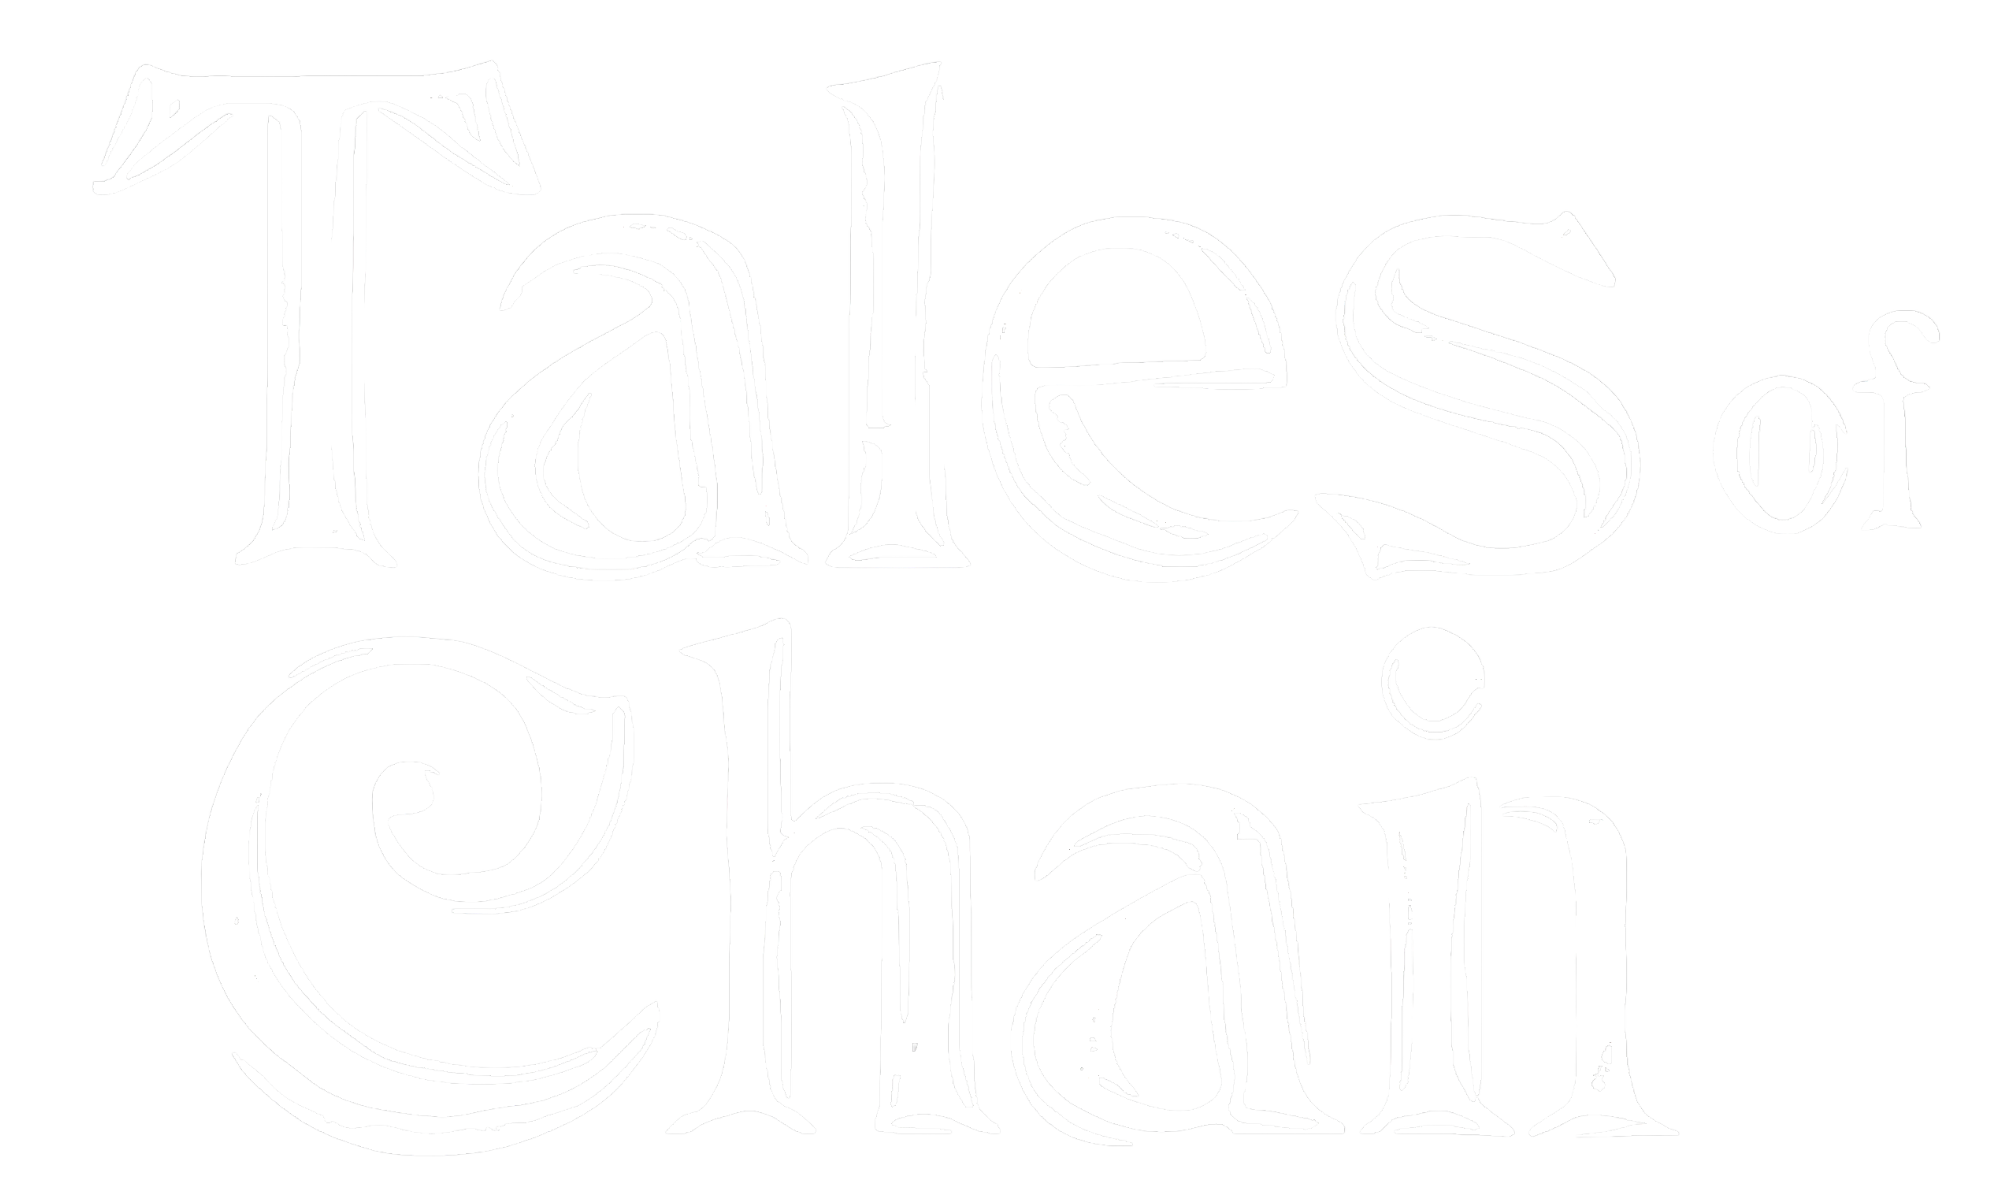 Tales of Chain